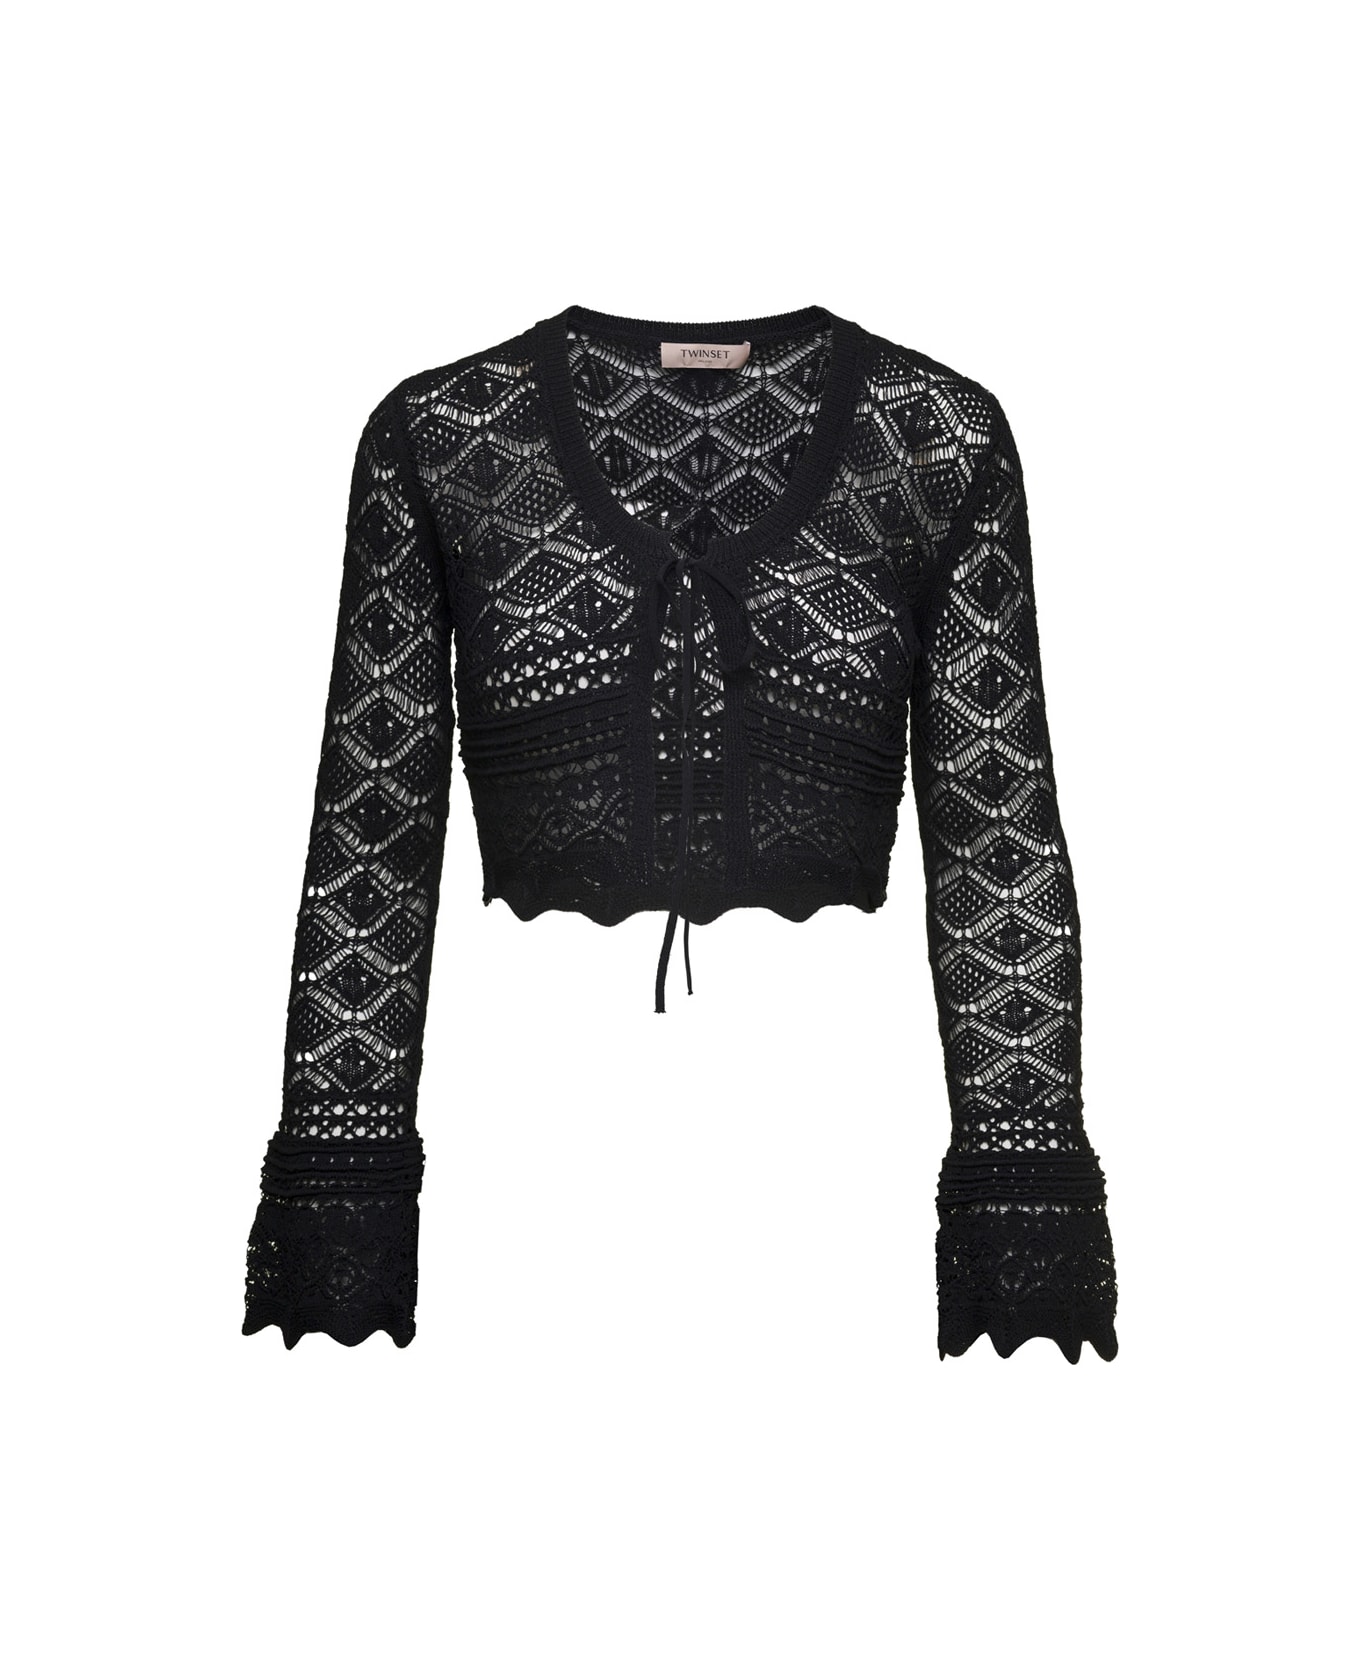 TwinSet Black Sweater With Open Knit Work In Viscose Blend Woman - Black